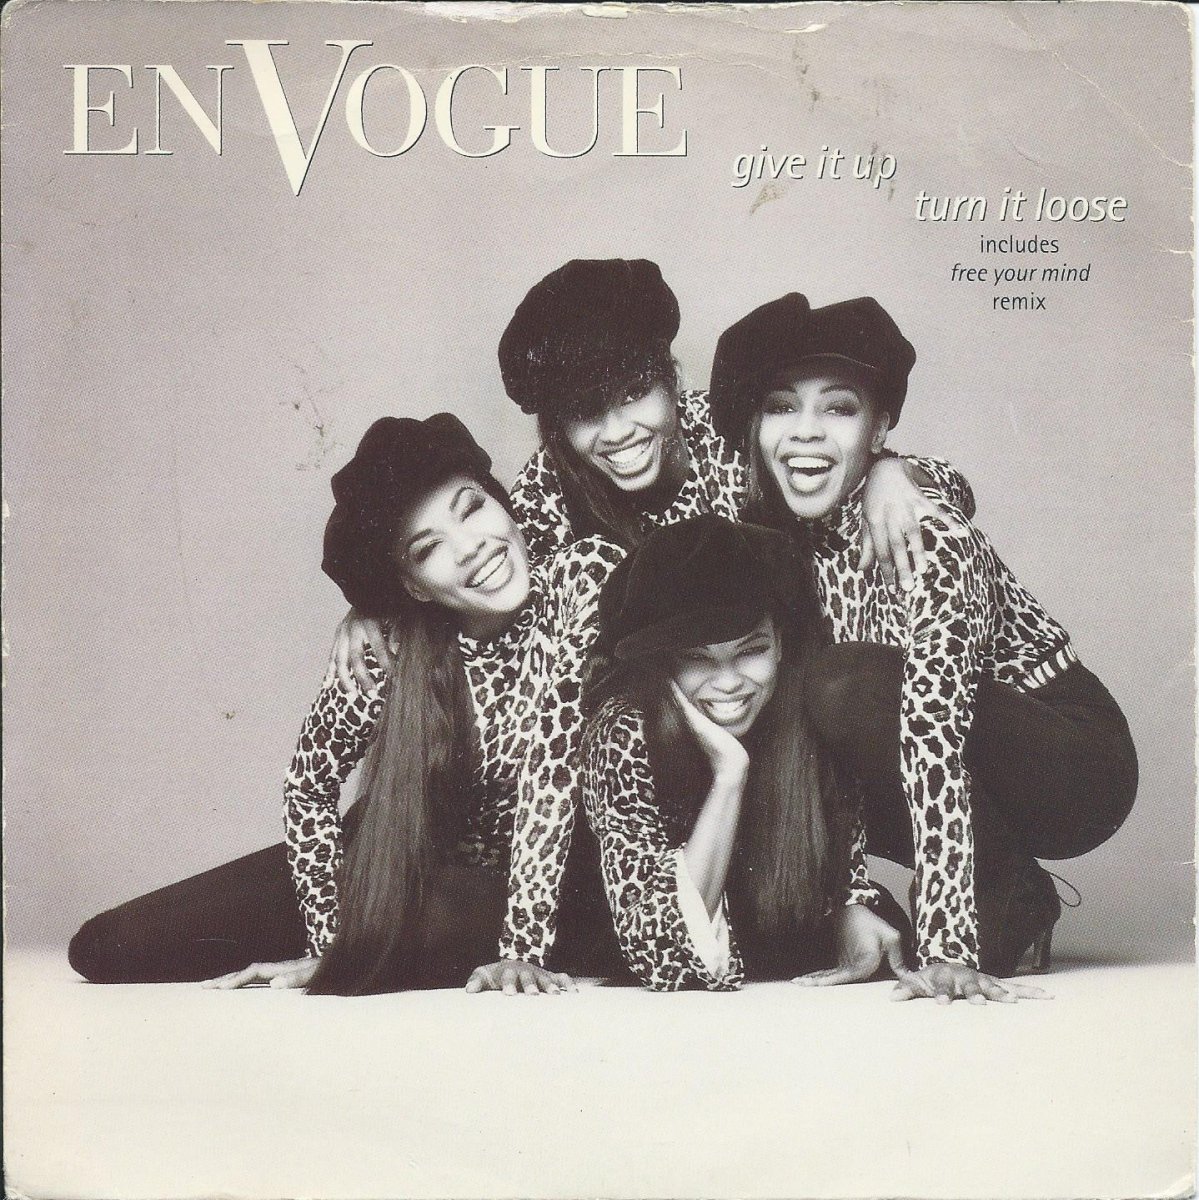 EN VOGUE / GIVE IT UP, TURN IT LOOSE / 	FREE YOUR MIND (THEO'S REC AND WRECK REMIX) (7